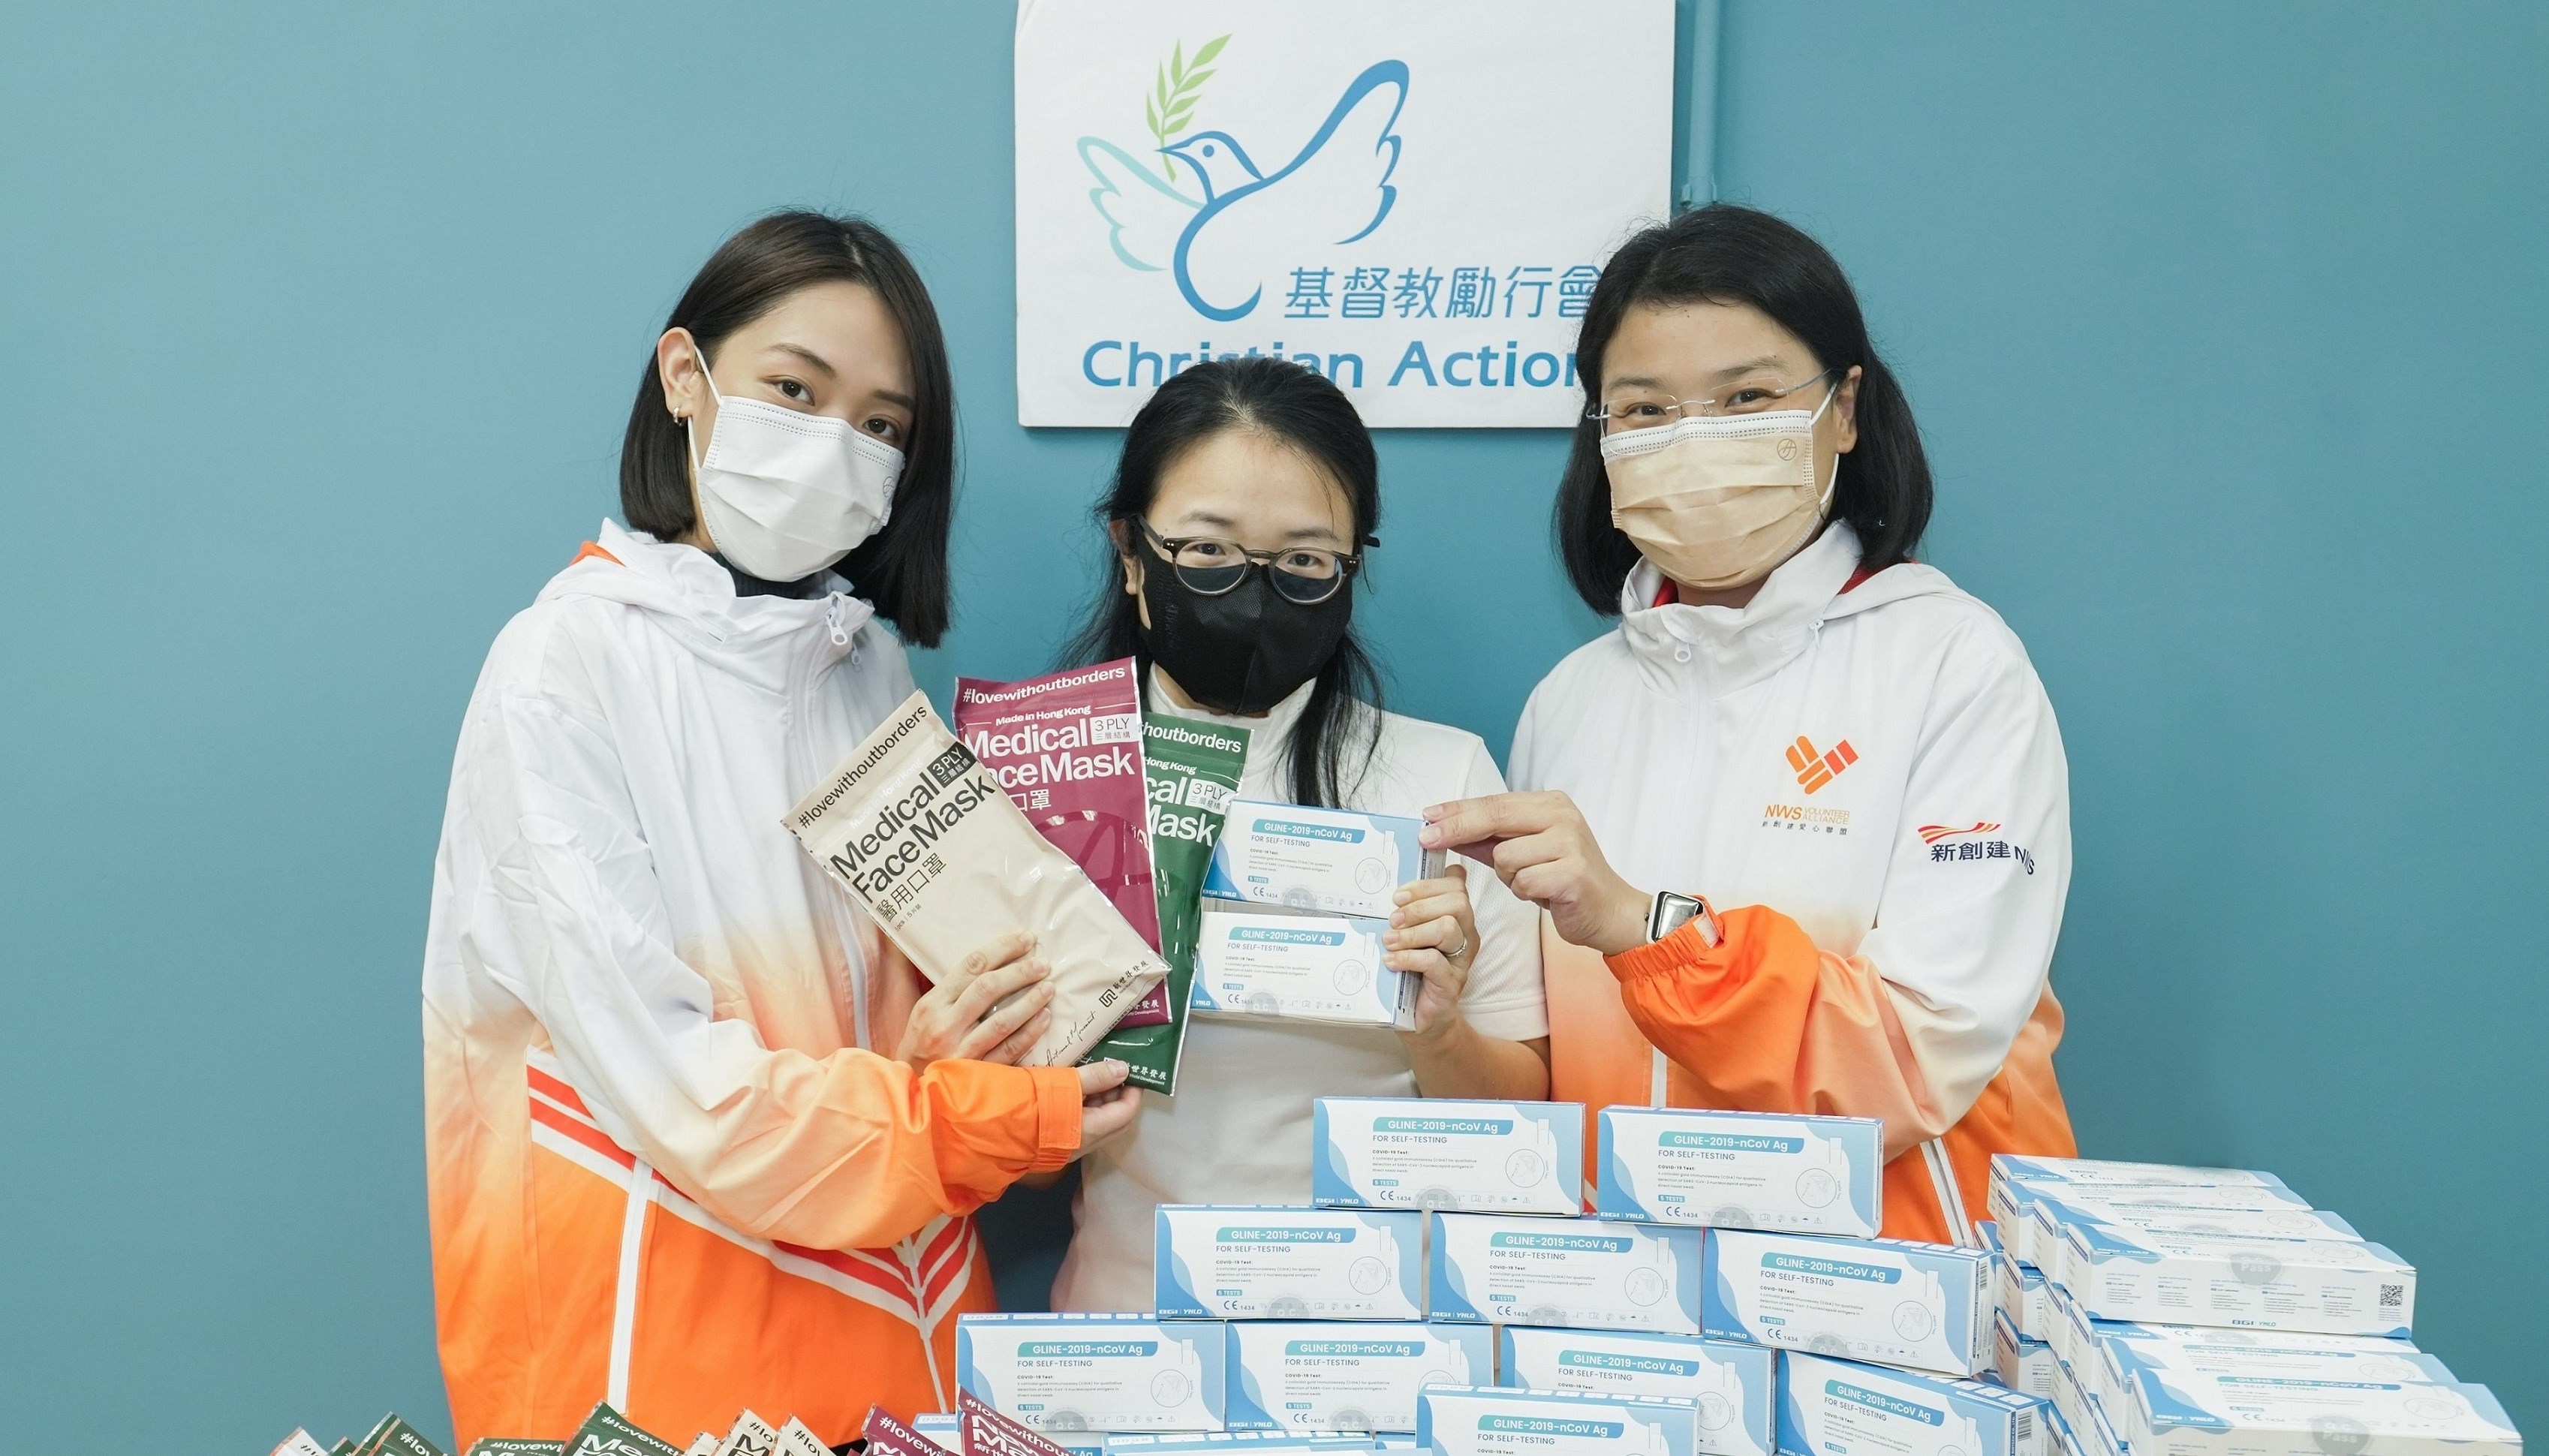  NWS Donates 20,000 Sets of Rapid Antigen Test Kits to the Underprivileged